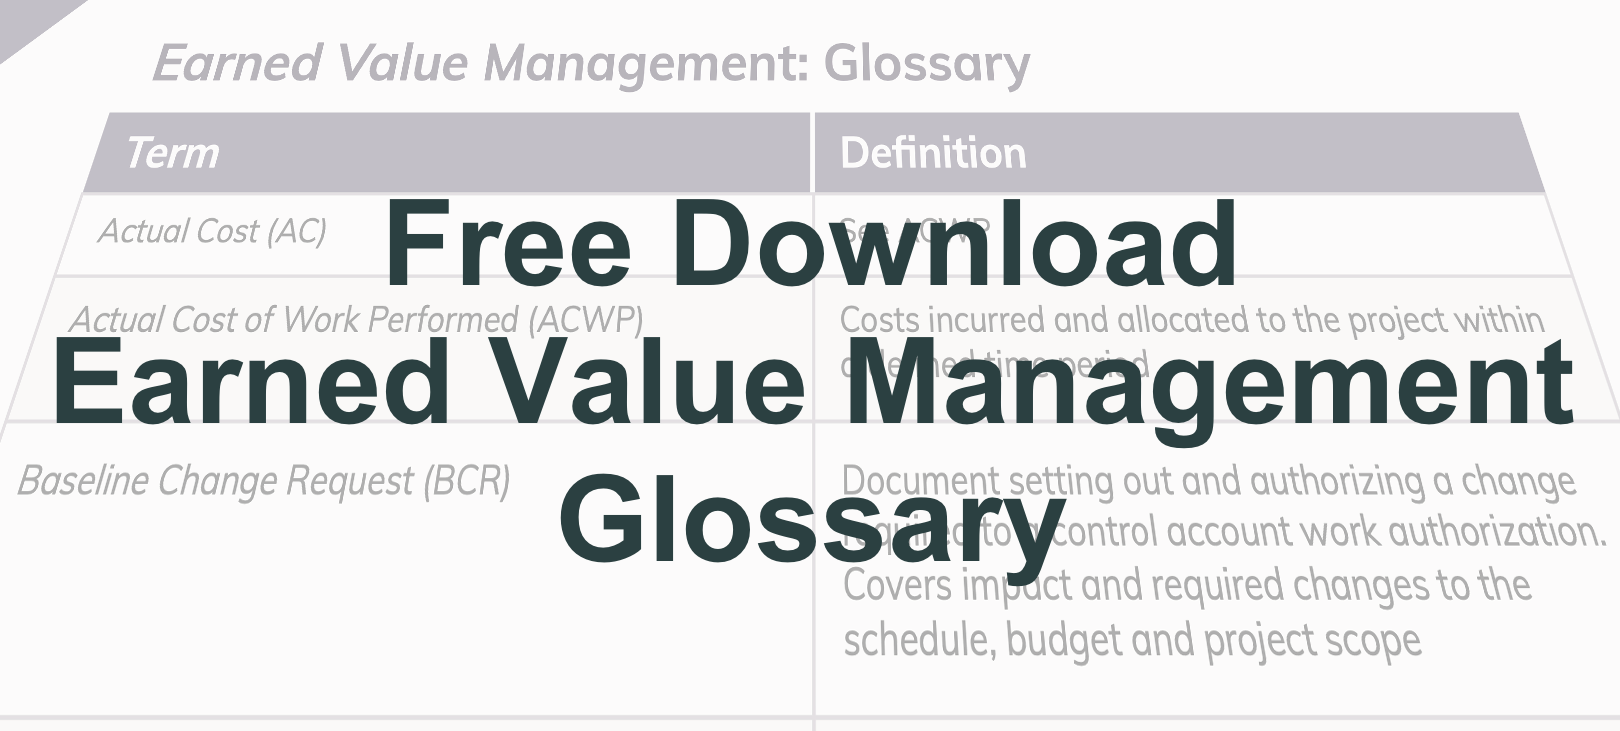 Earned Value Management Glossary